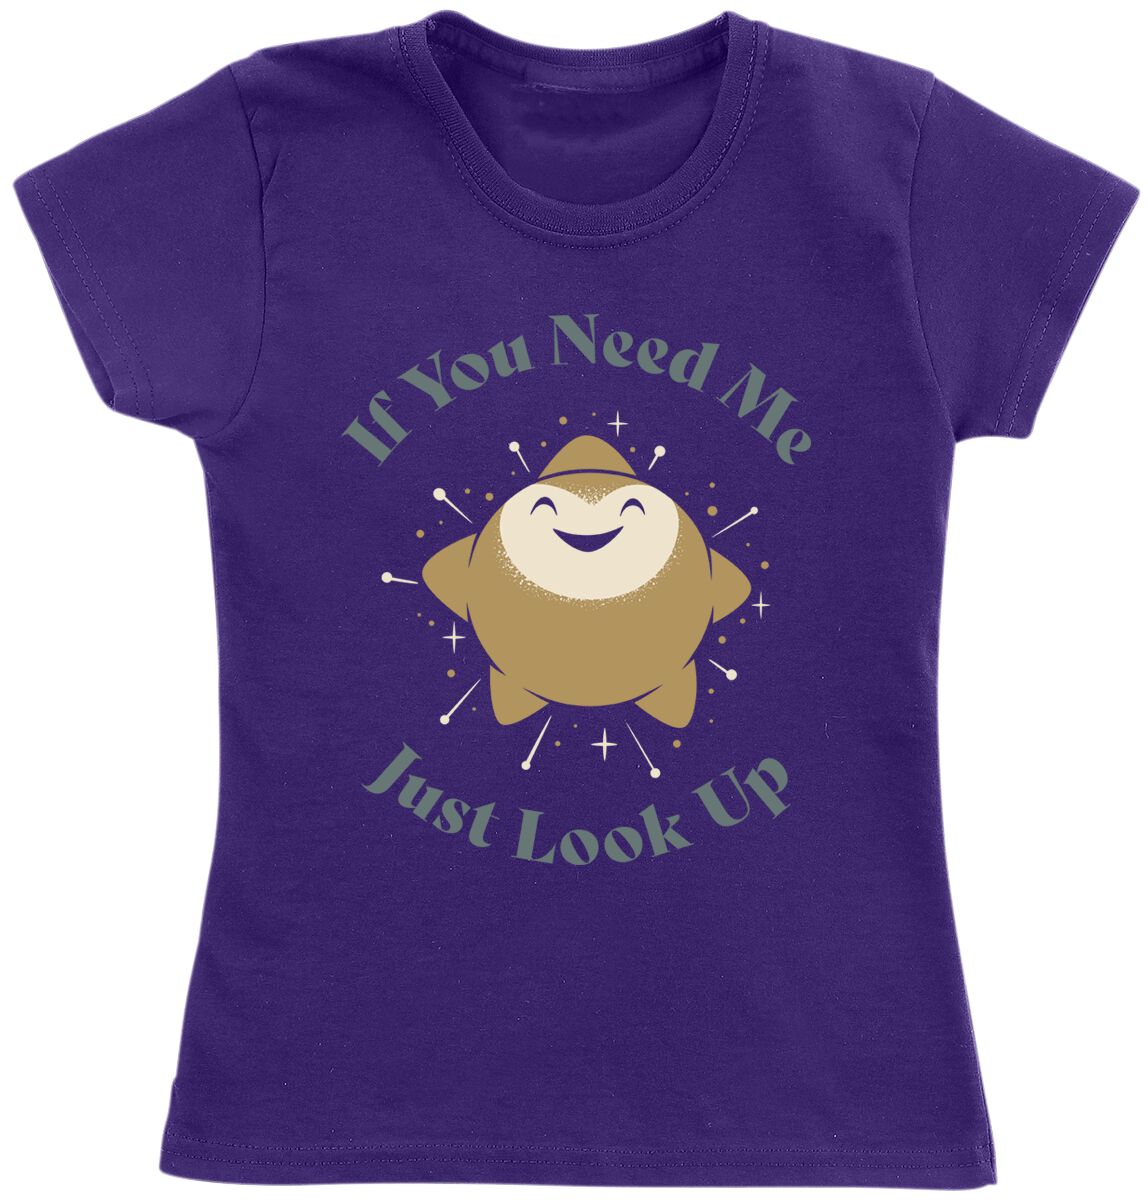 Wish If You Need Me Just Look Up T-Shirt lila in 128